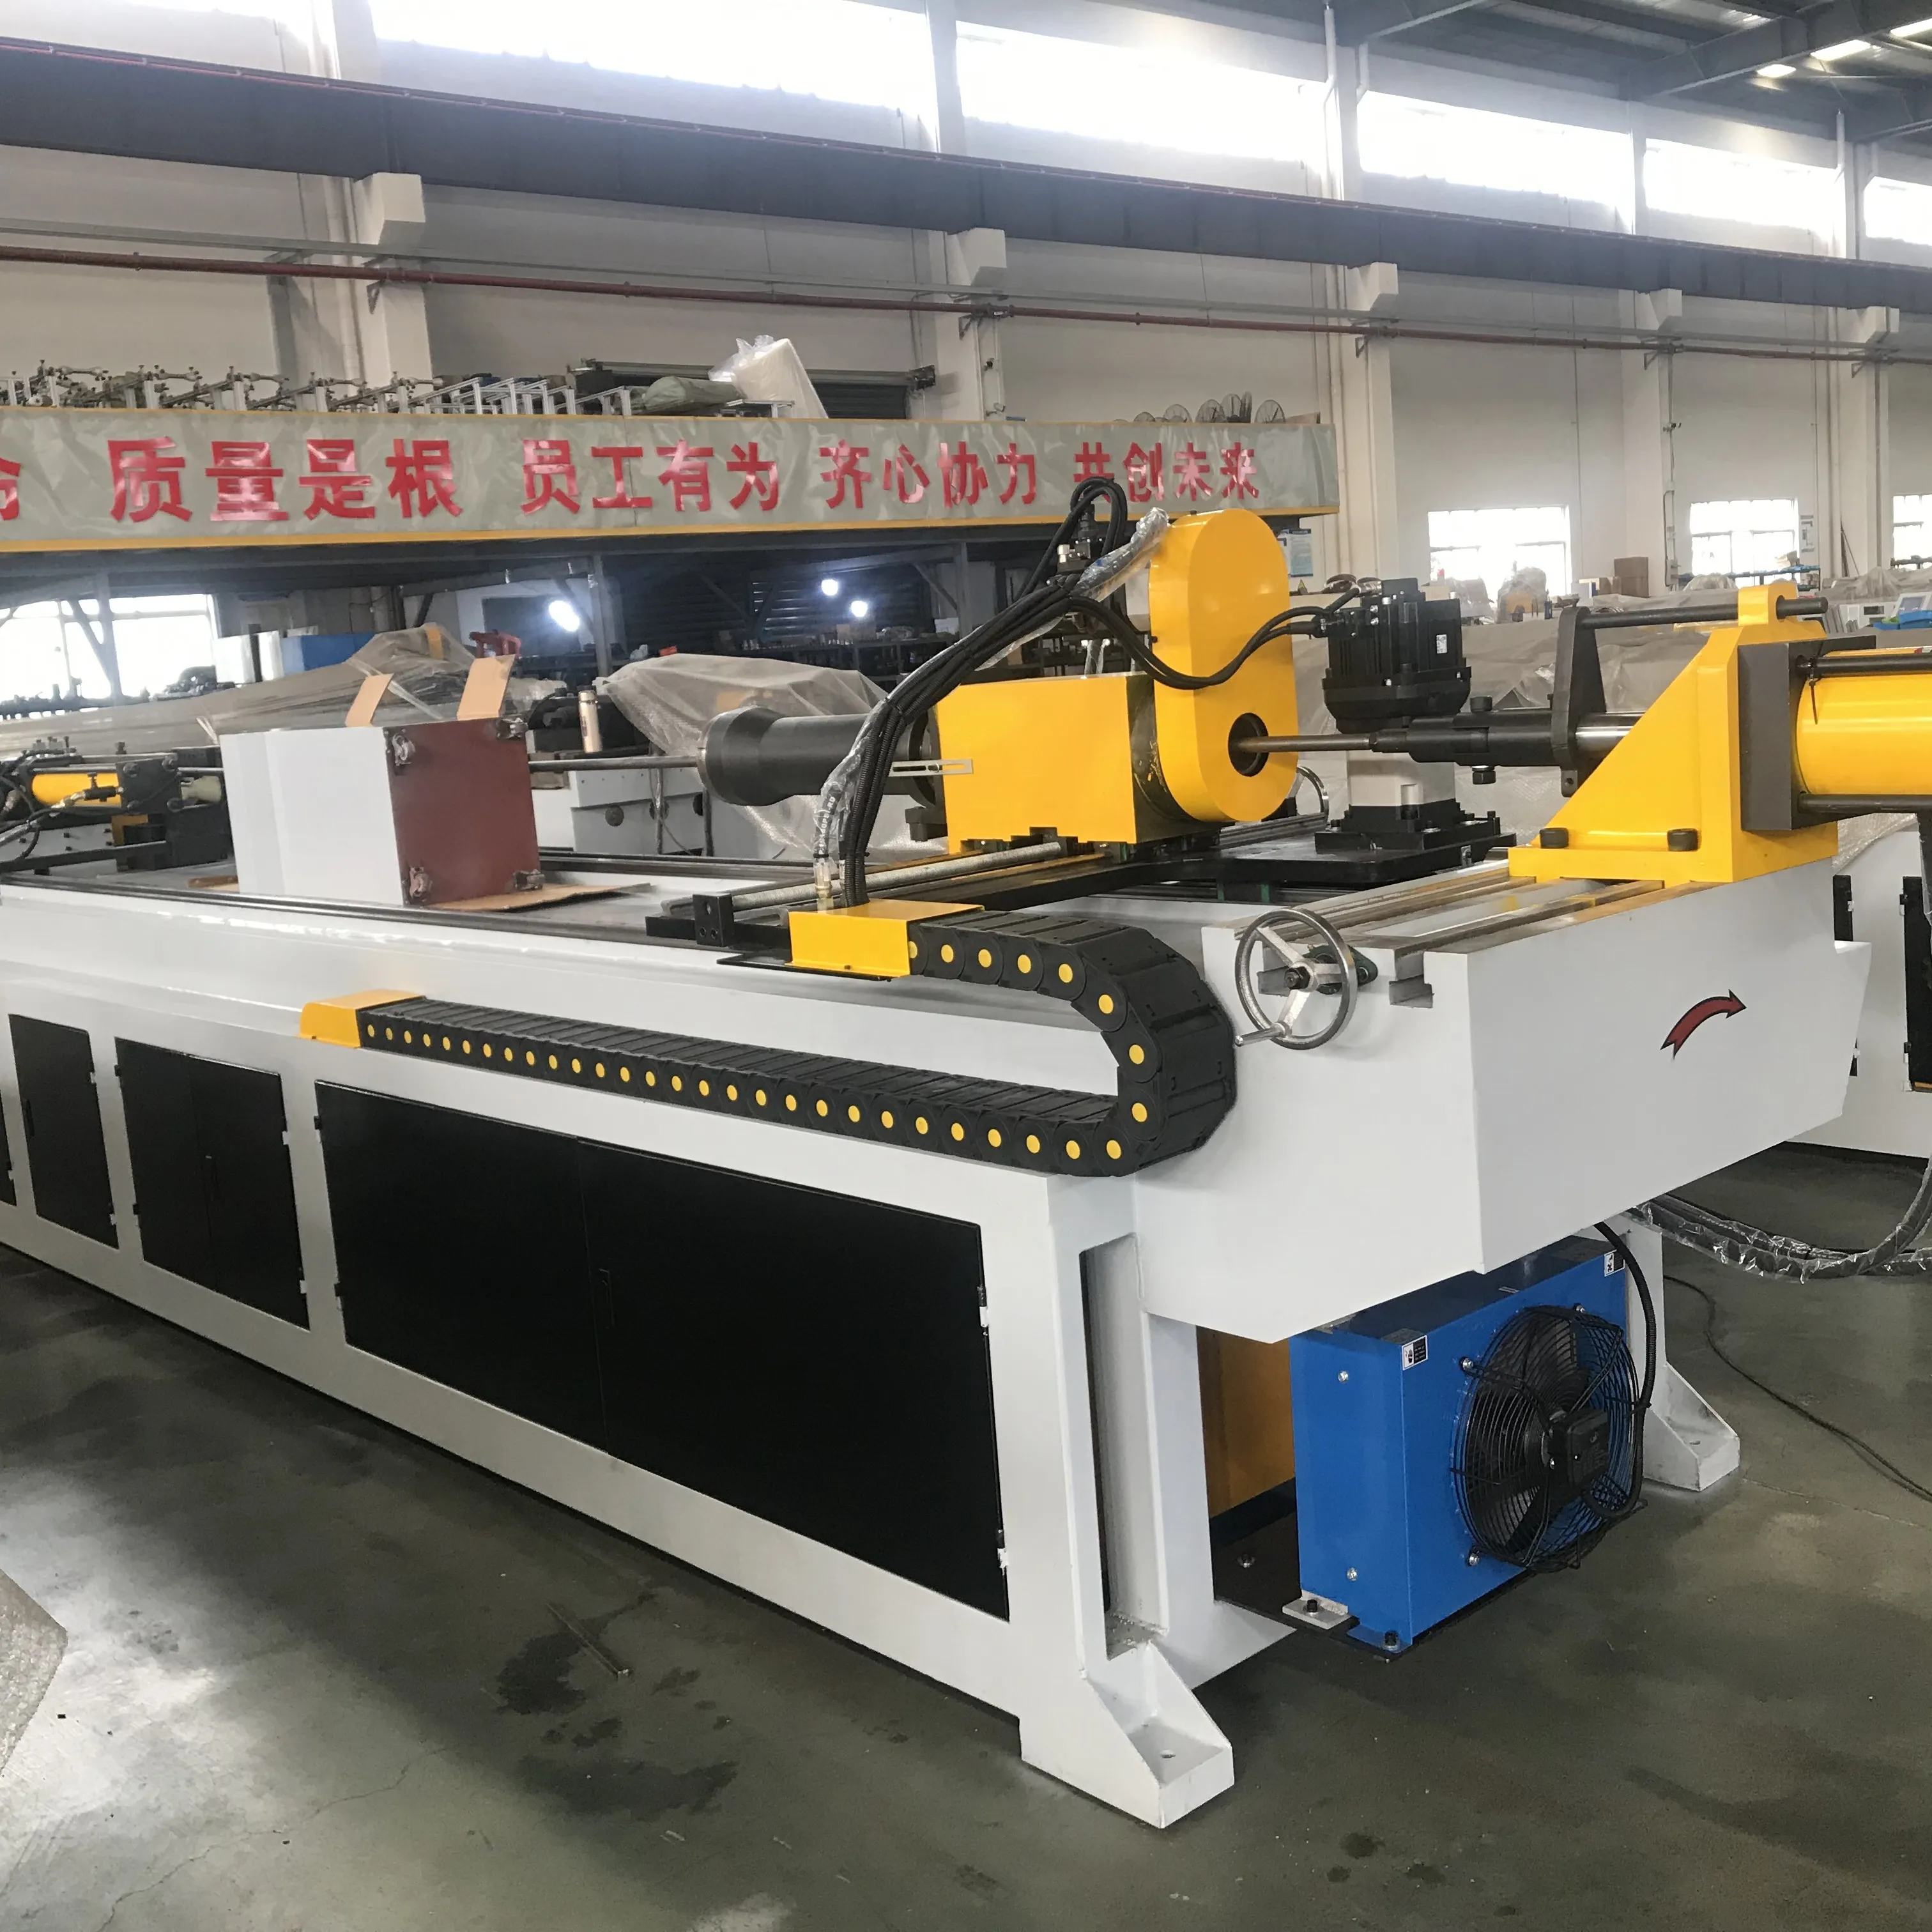 DW130CNC-2A-1S Metal Bending Machine Metal Bending Machine. Maximum Bending Angle 190 Degrees Can Process Flat Steel and copper